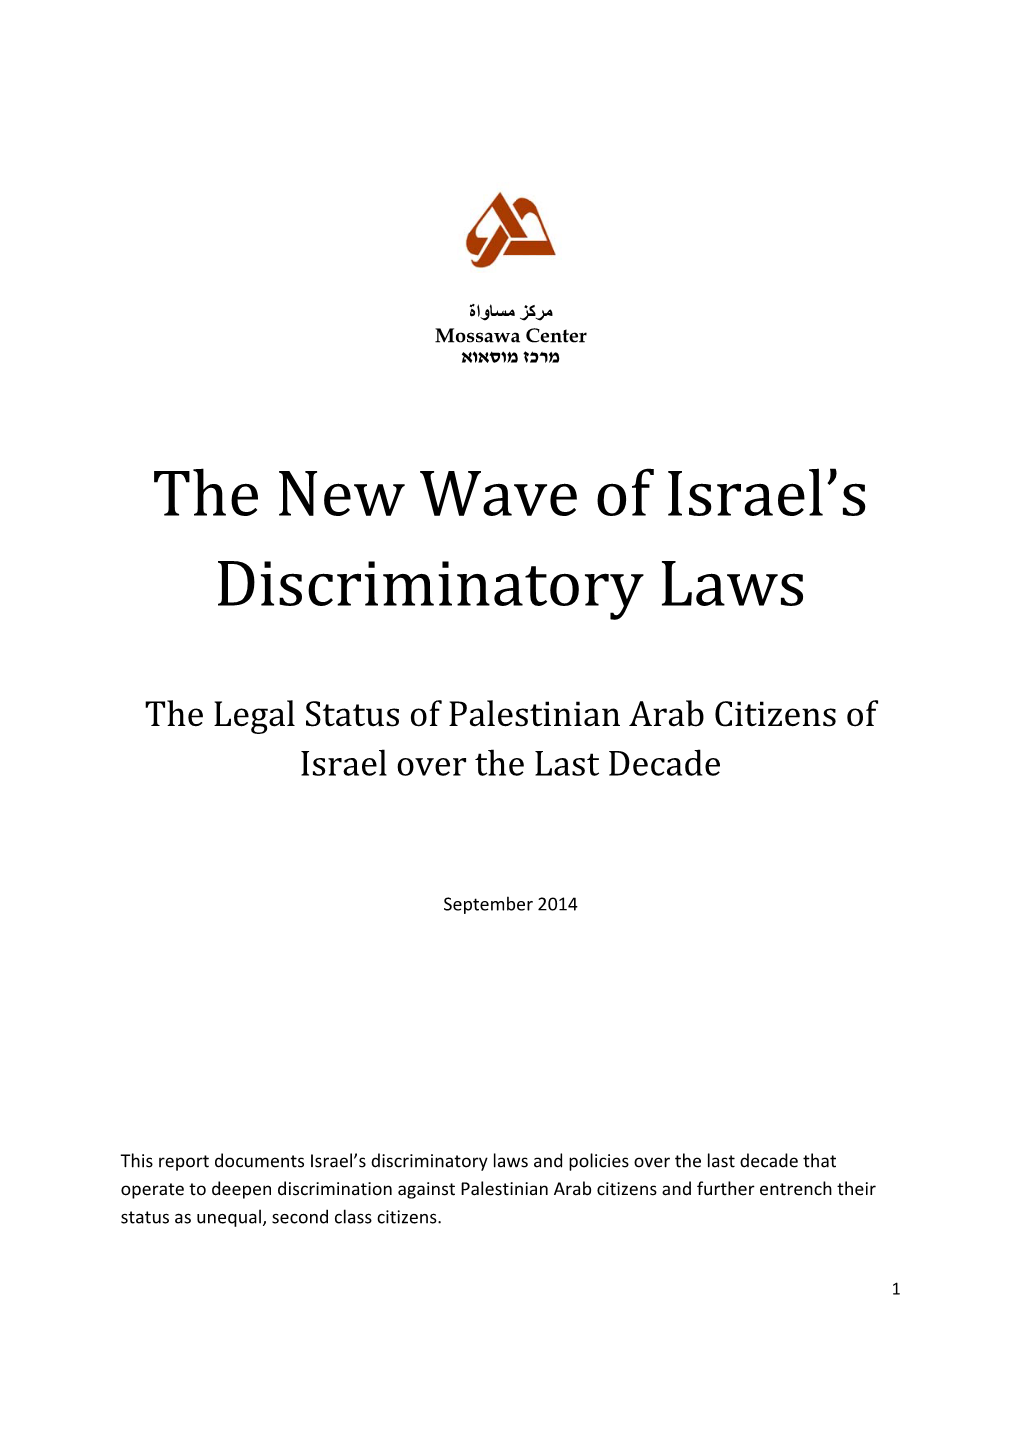 The New Wave of Israel's Discriminatory Laws